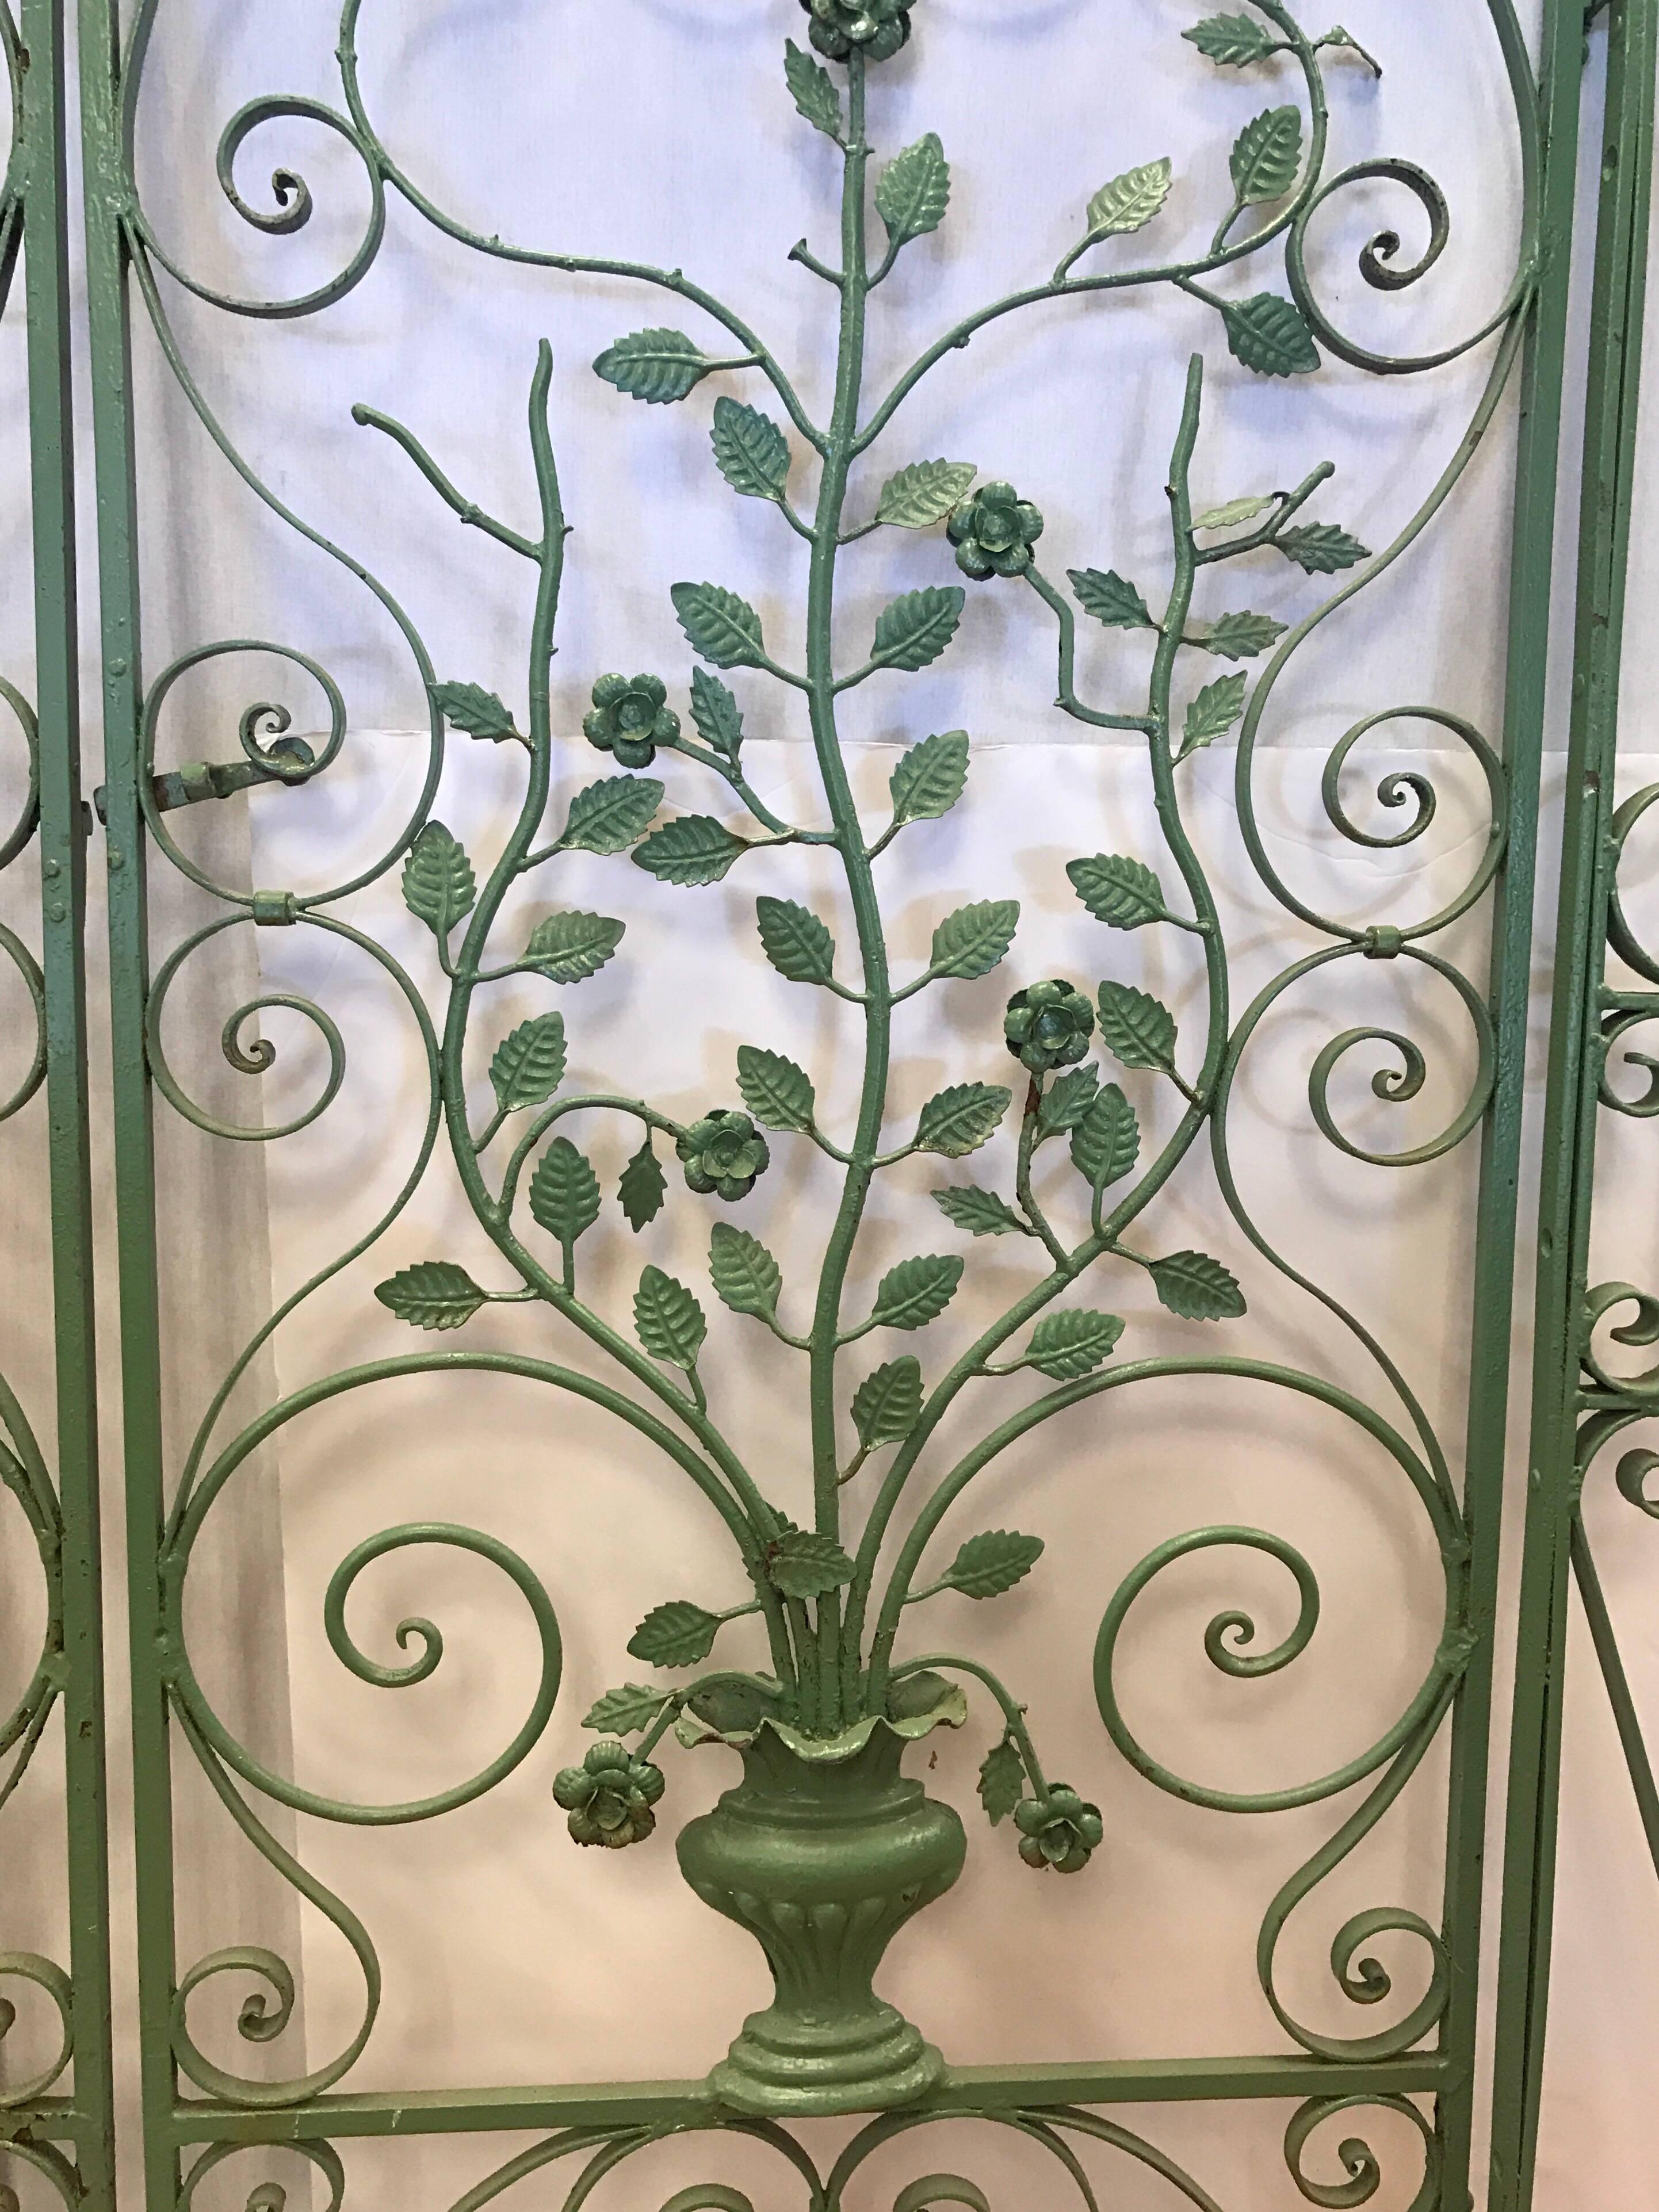 France, this matching pair of painted wrought iron gates work together and have center latch and ground support, circa 1880s. The metalwork is marvelous and one of a kind.